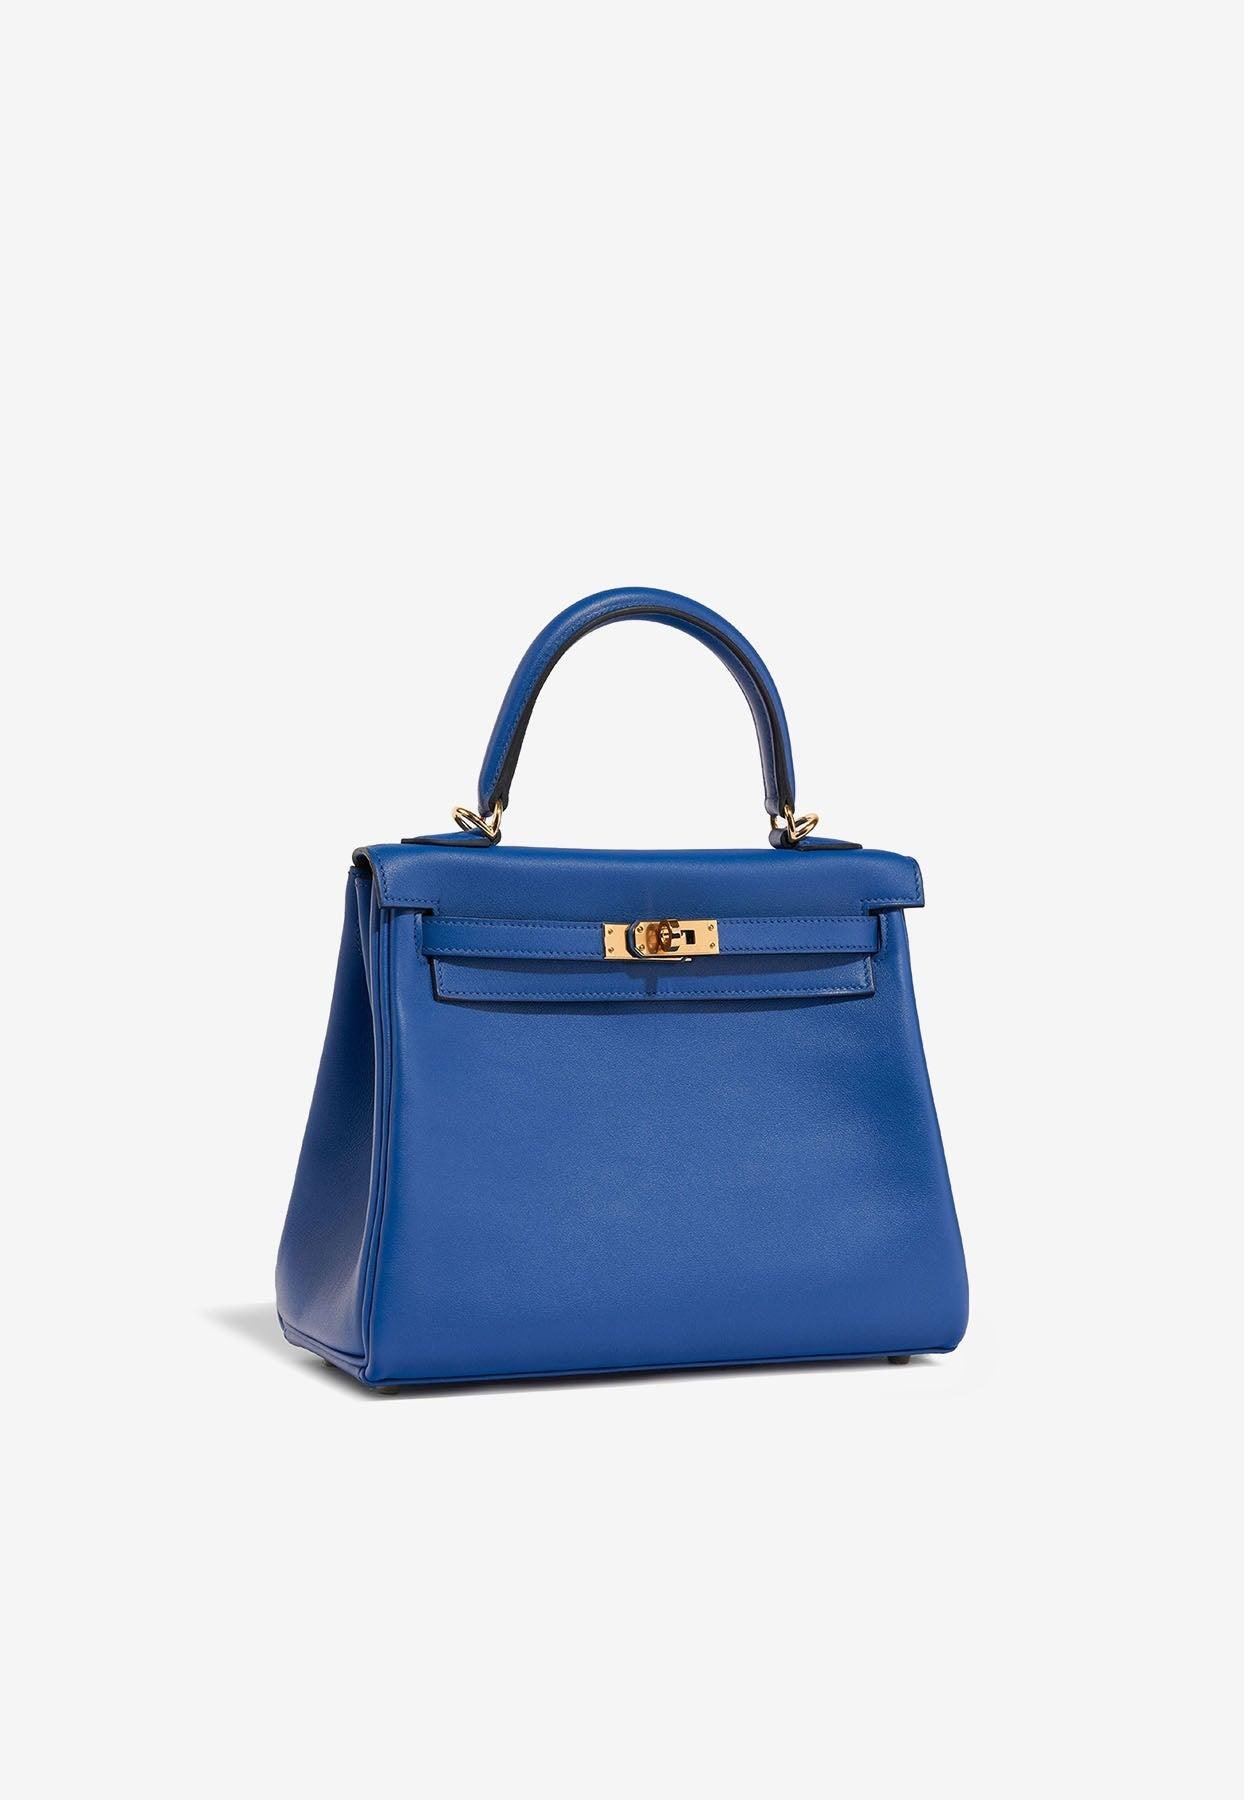 Hermès Kelly 25 In Bleu De France Swift Leather With Gold